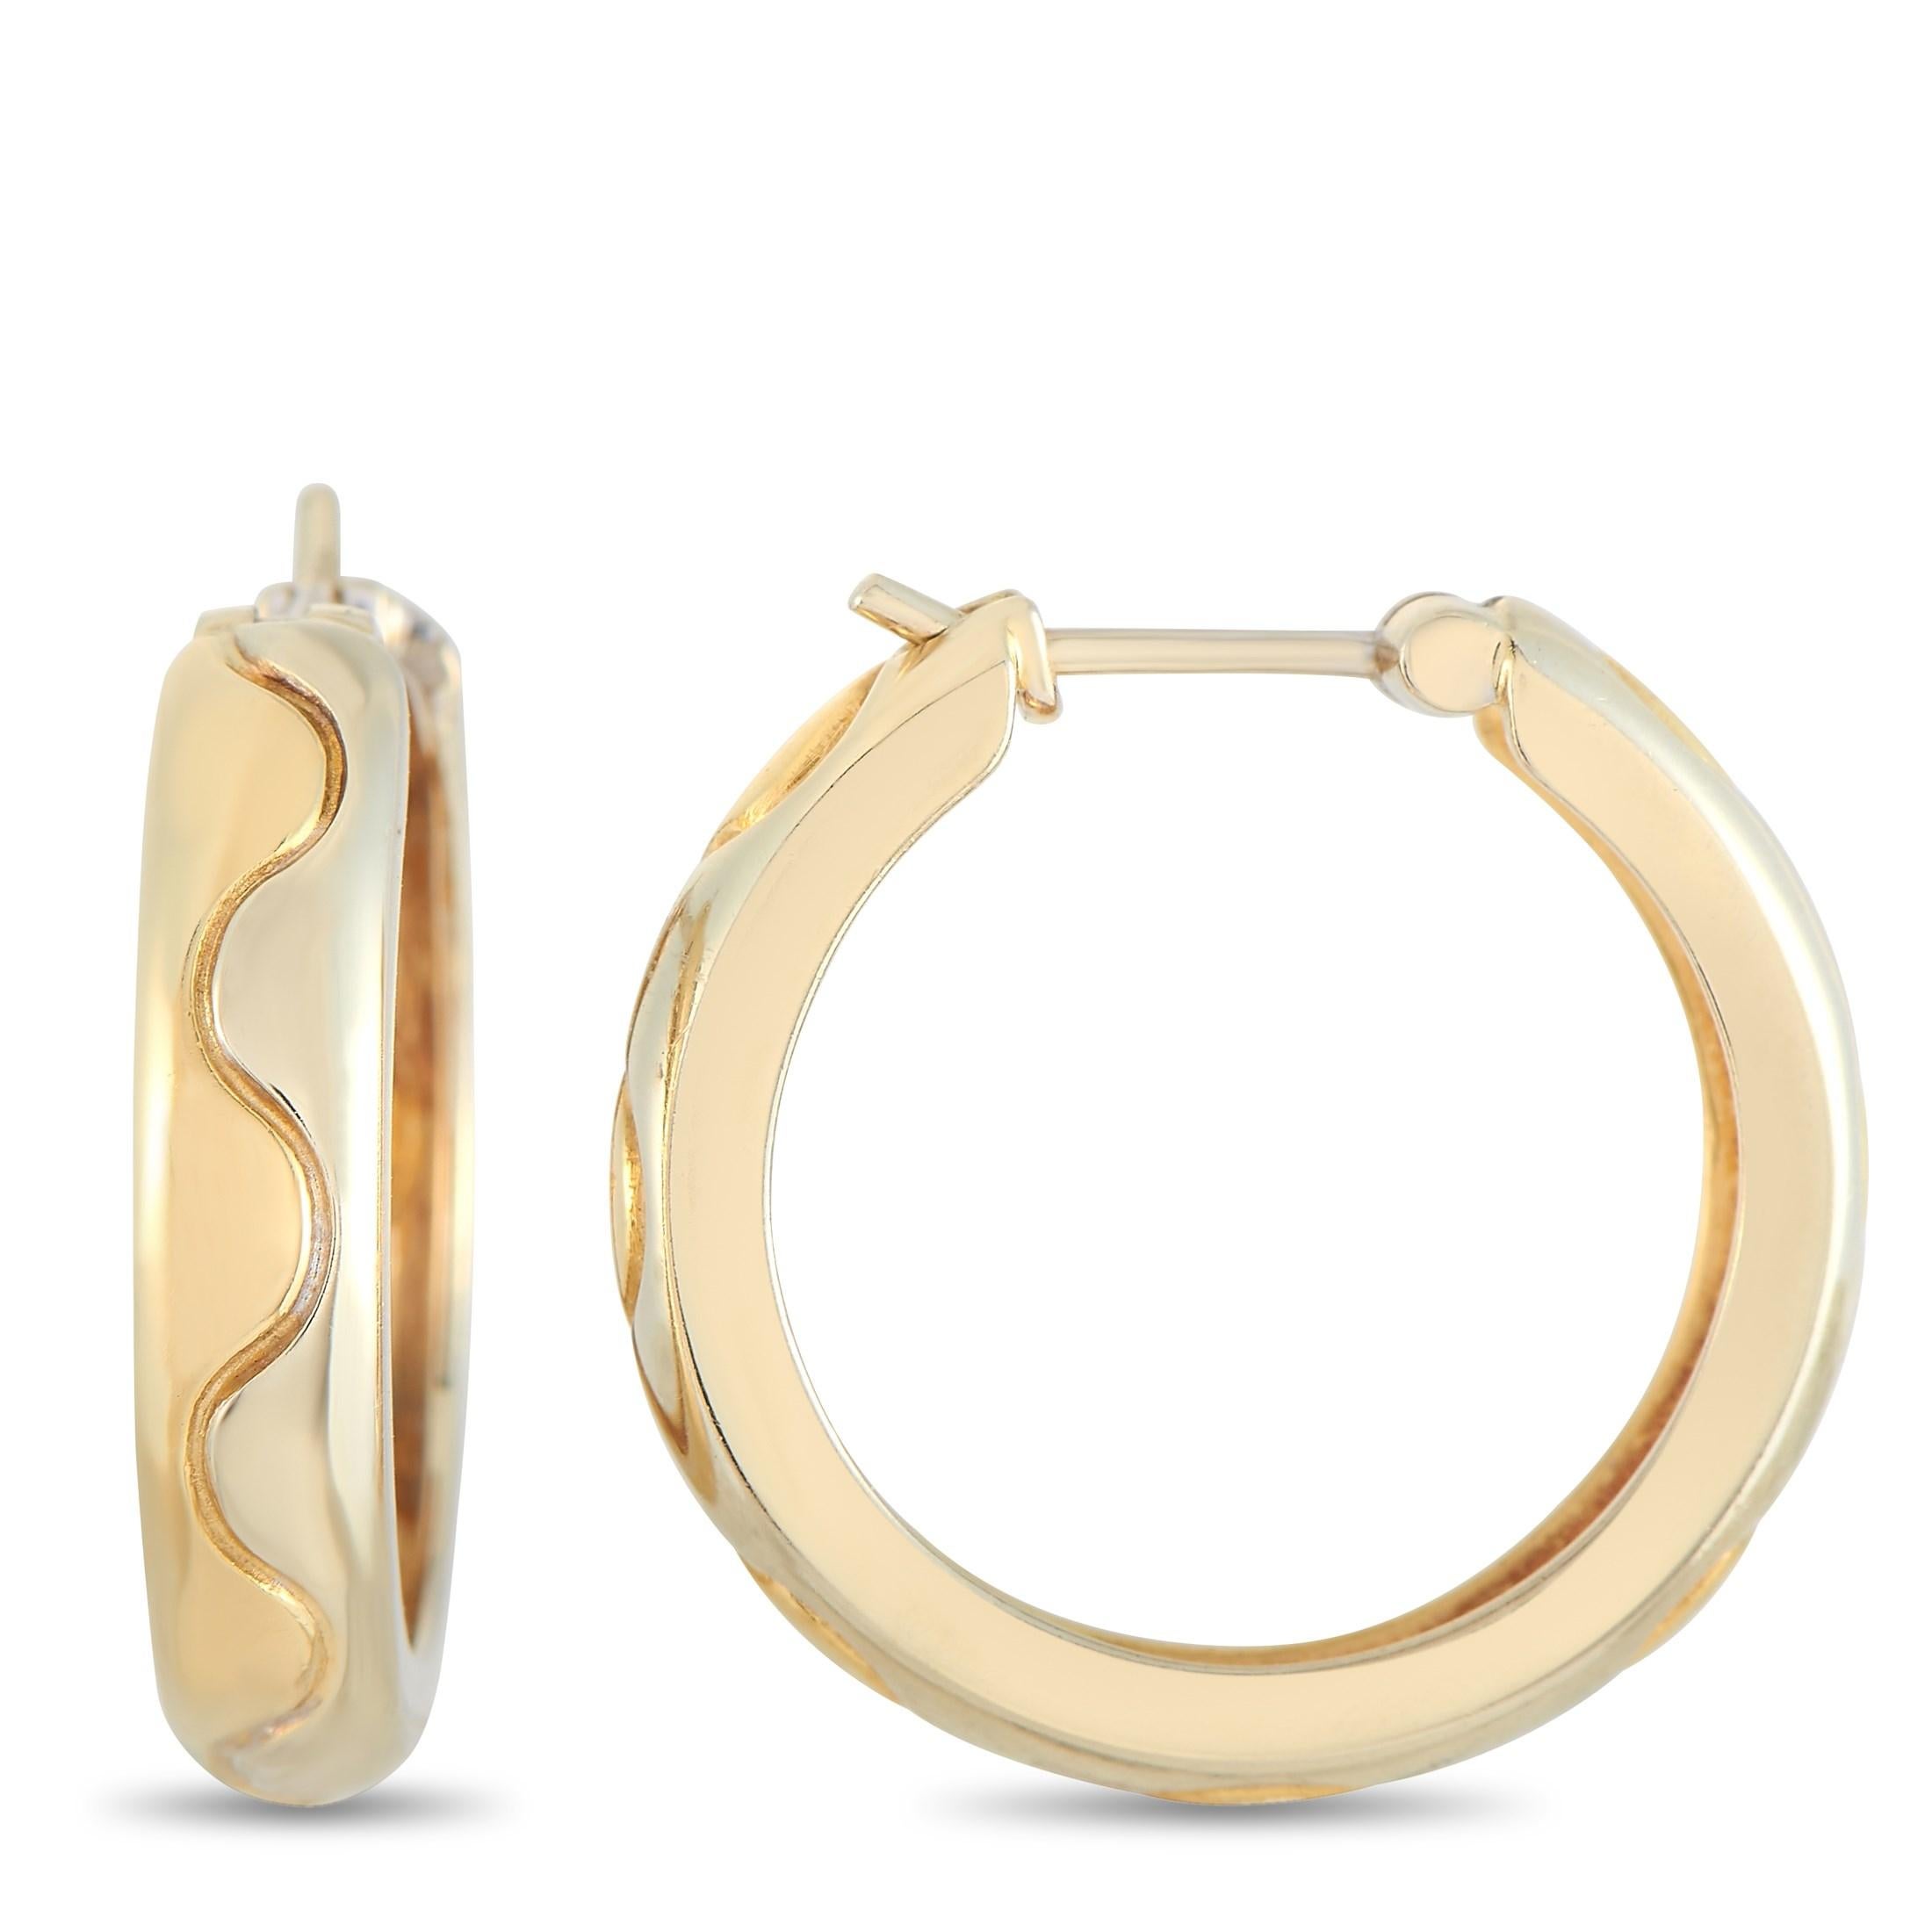 These Cartier 18K Yellow Gold Hoop Earrings are made with 18K Yellow Gold and feature a sort of zig-zag pattern around the hoop. The earrings measure 0.75 inches in length and 0.25 inches in width with each weighing 4.05 grams for a total weight of